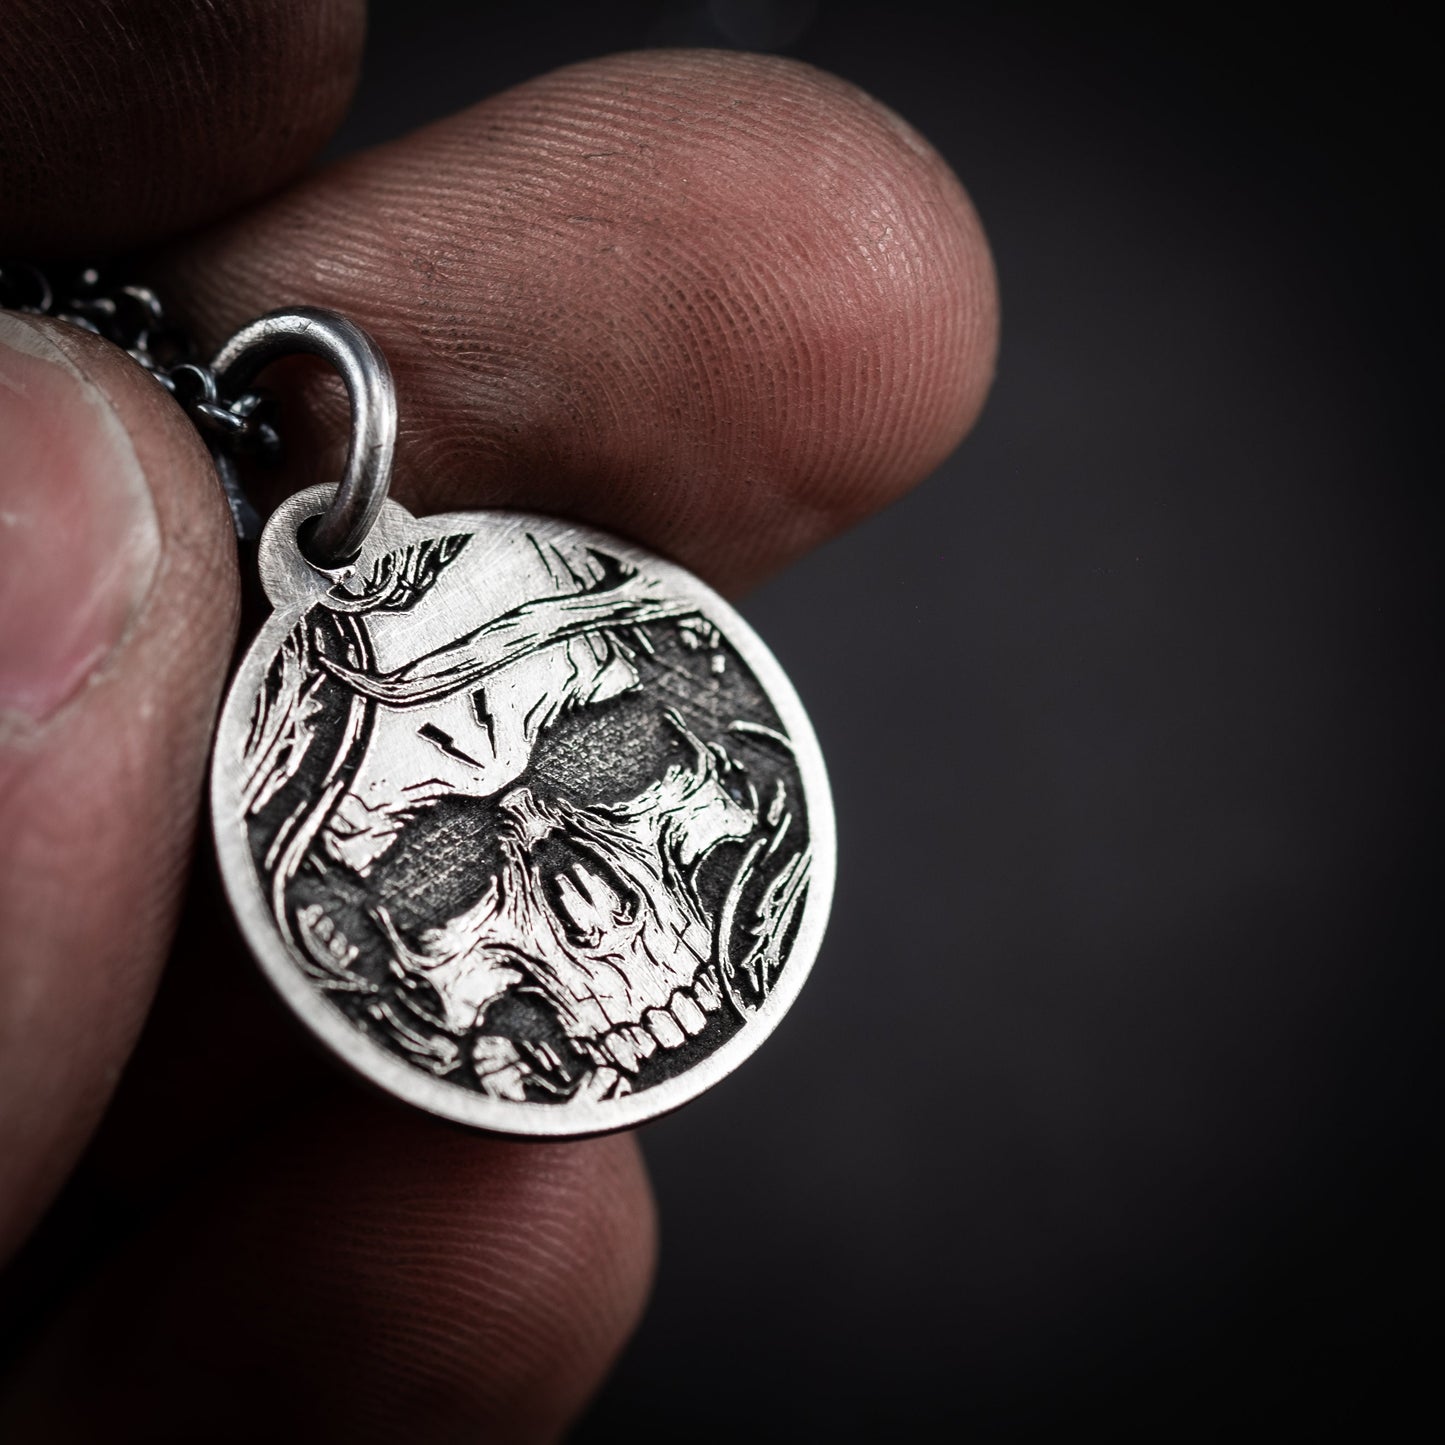 Engraved Custom Mens Skull Silver Necklace, Christmas Memento mori coin men's gift, Engraved personalized jewelry, Death necklace